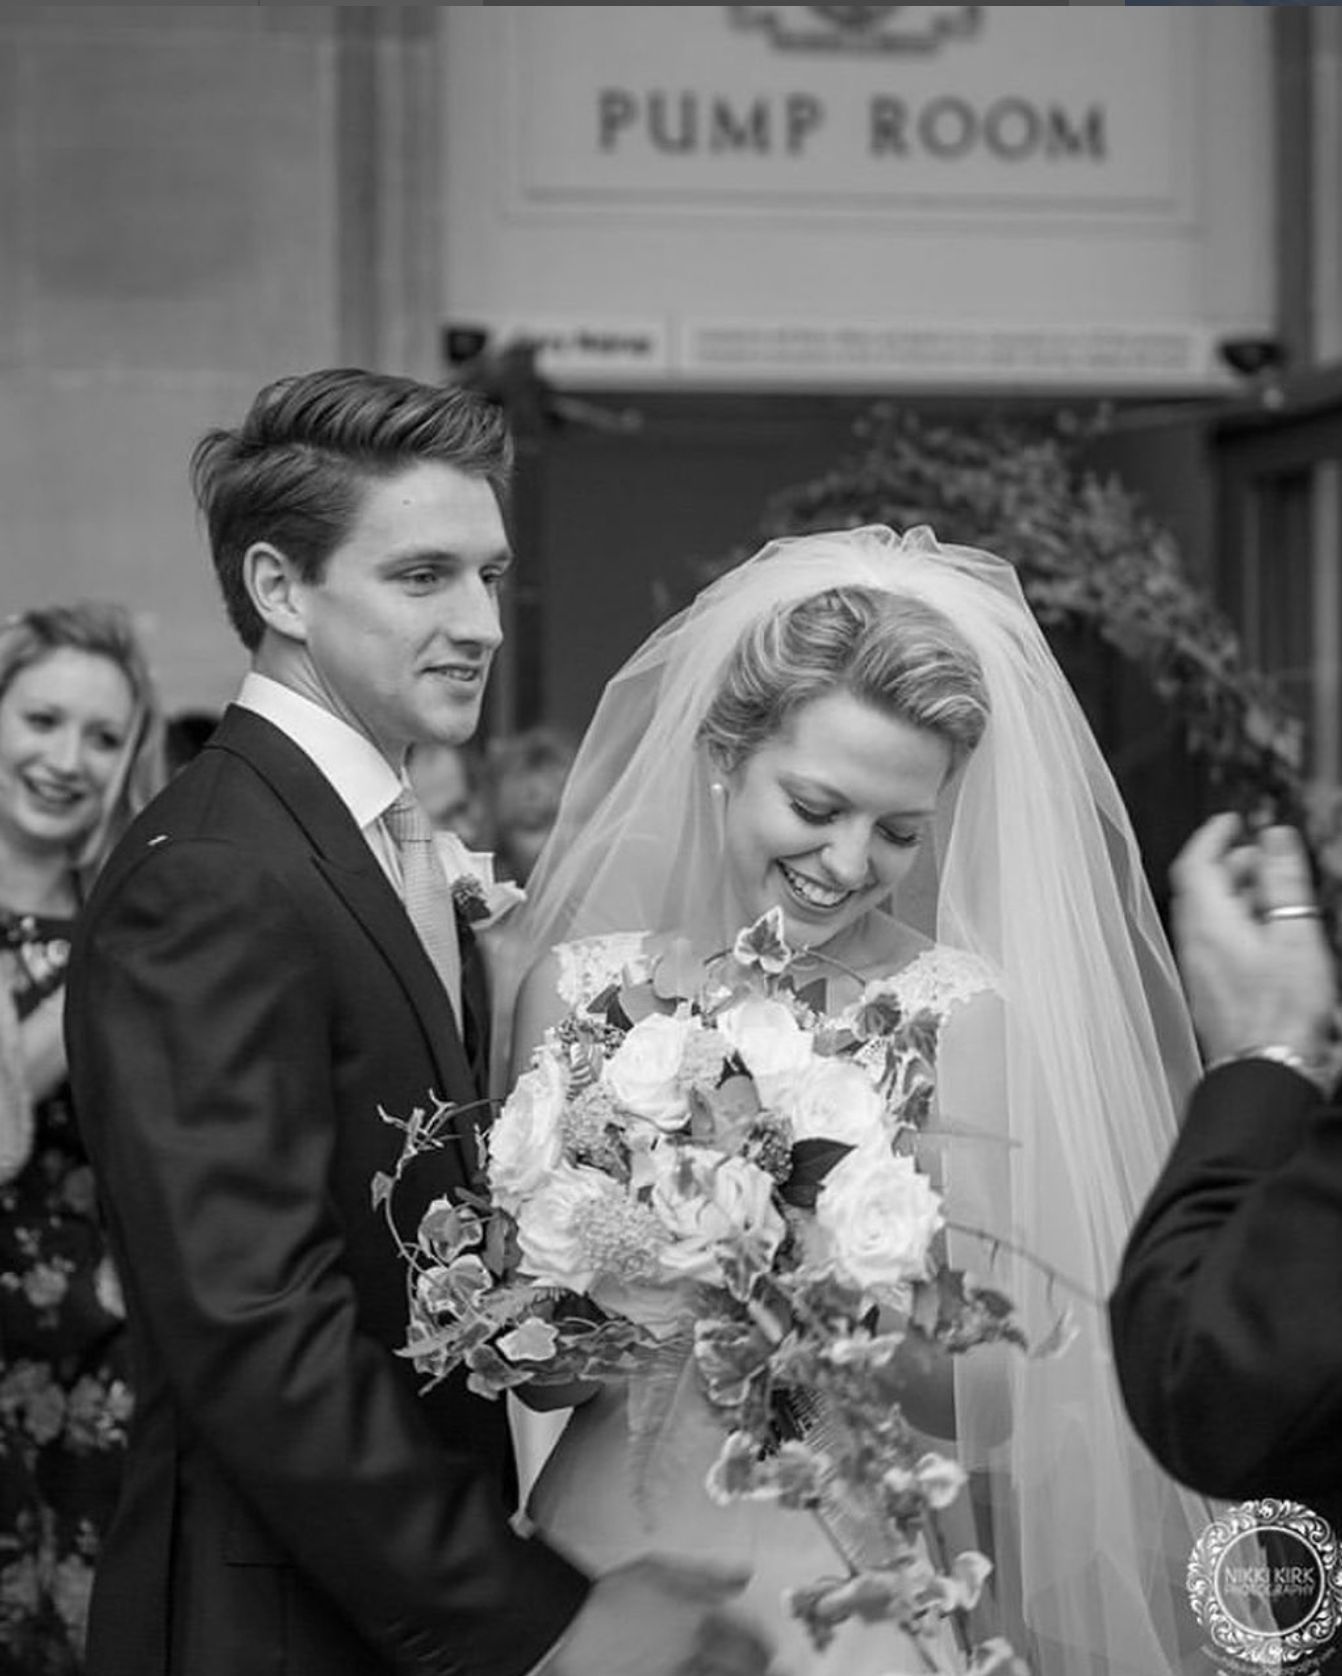 Tender black and white photograph of bride and groom just married.